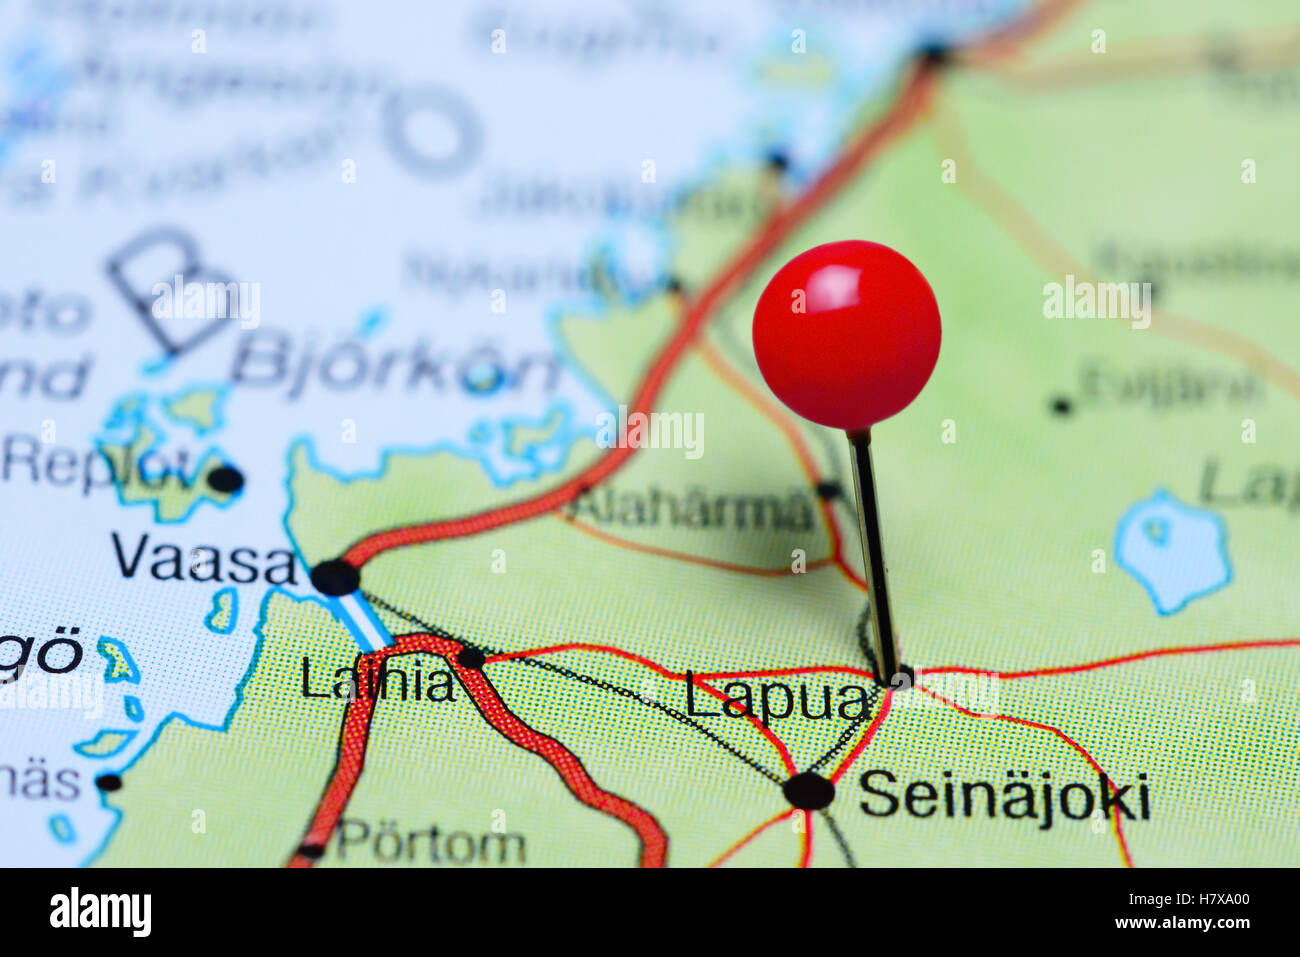 Lapua pinned on a map of Finland Stock Photo